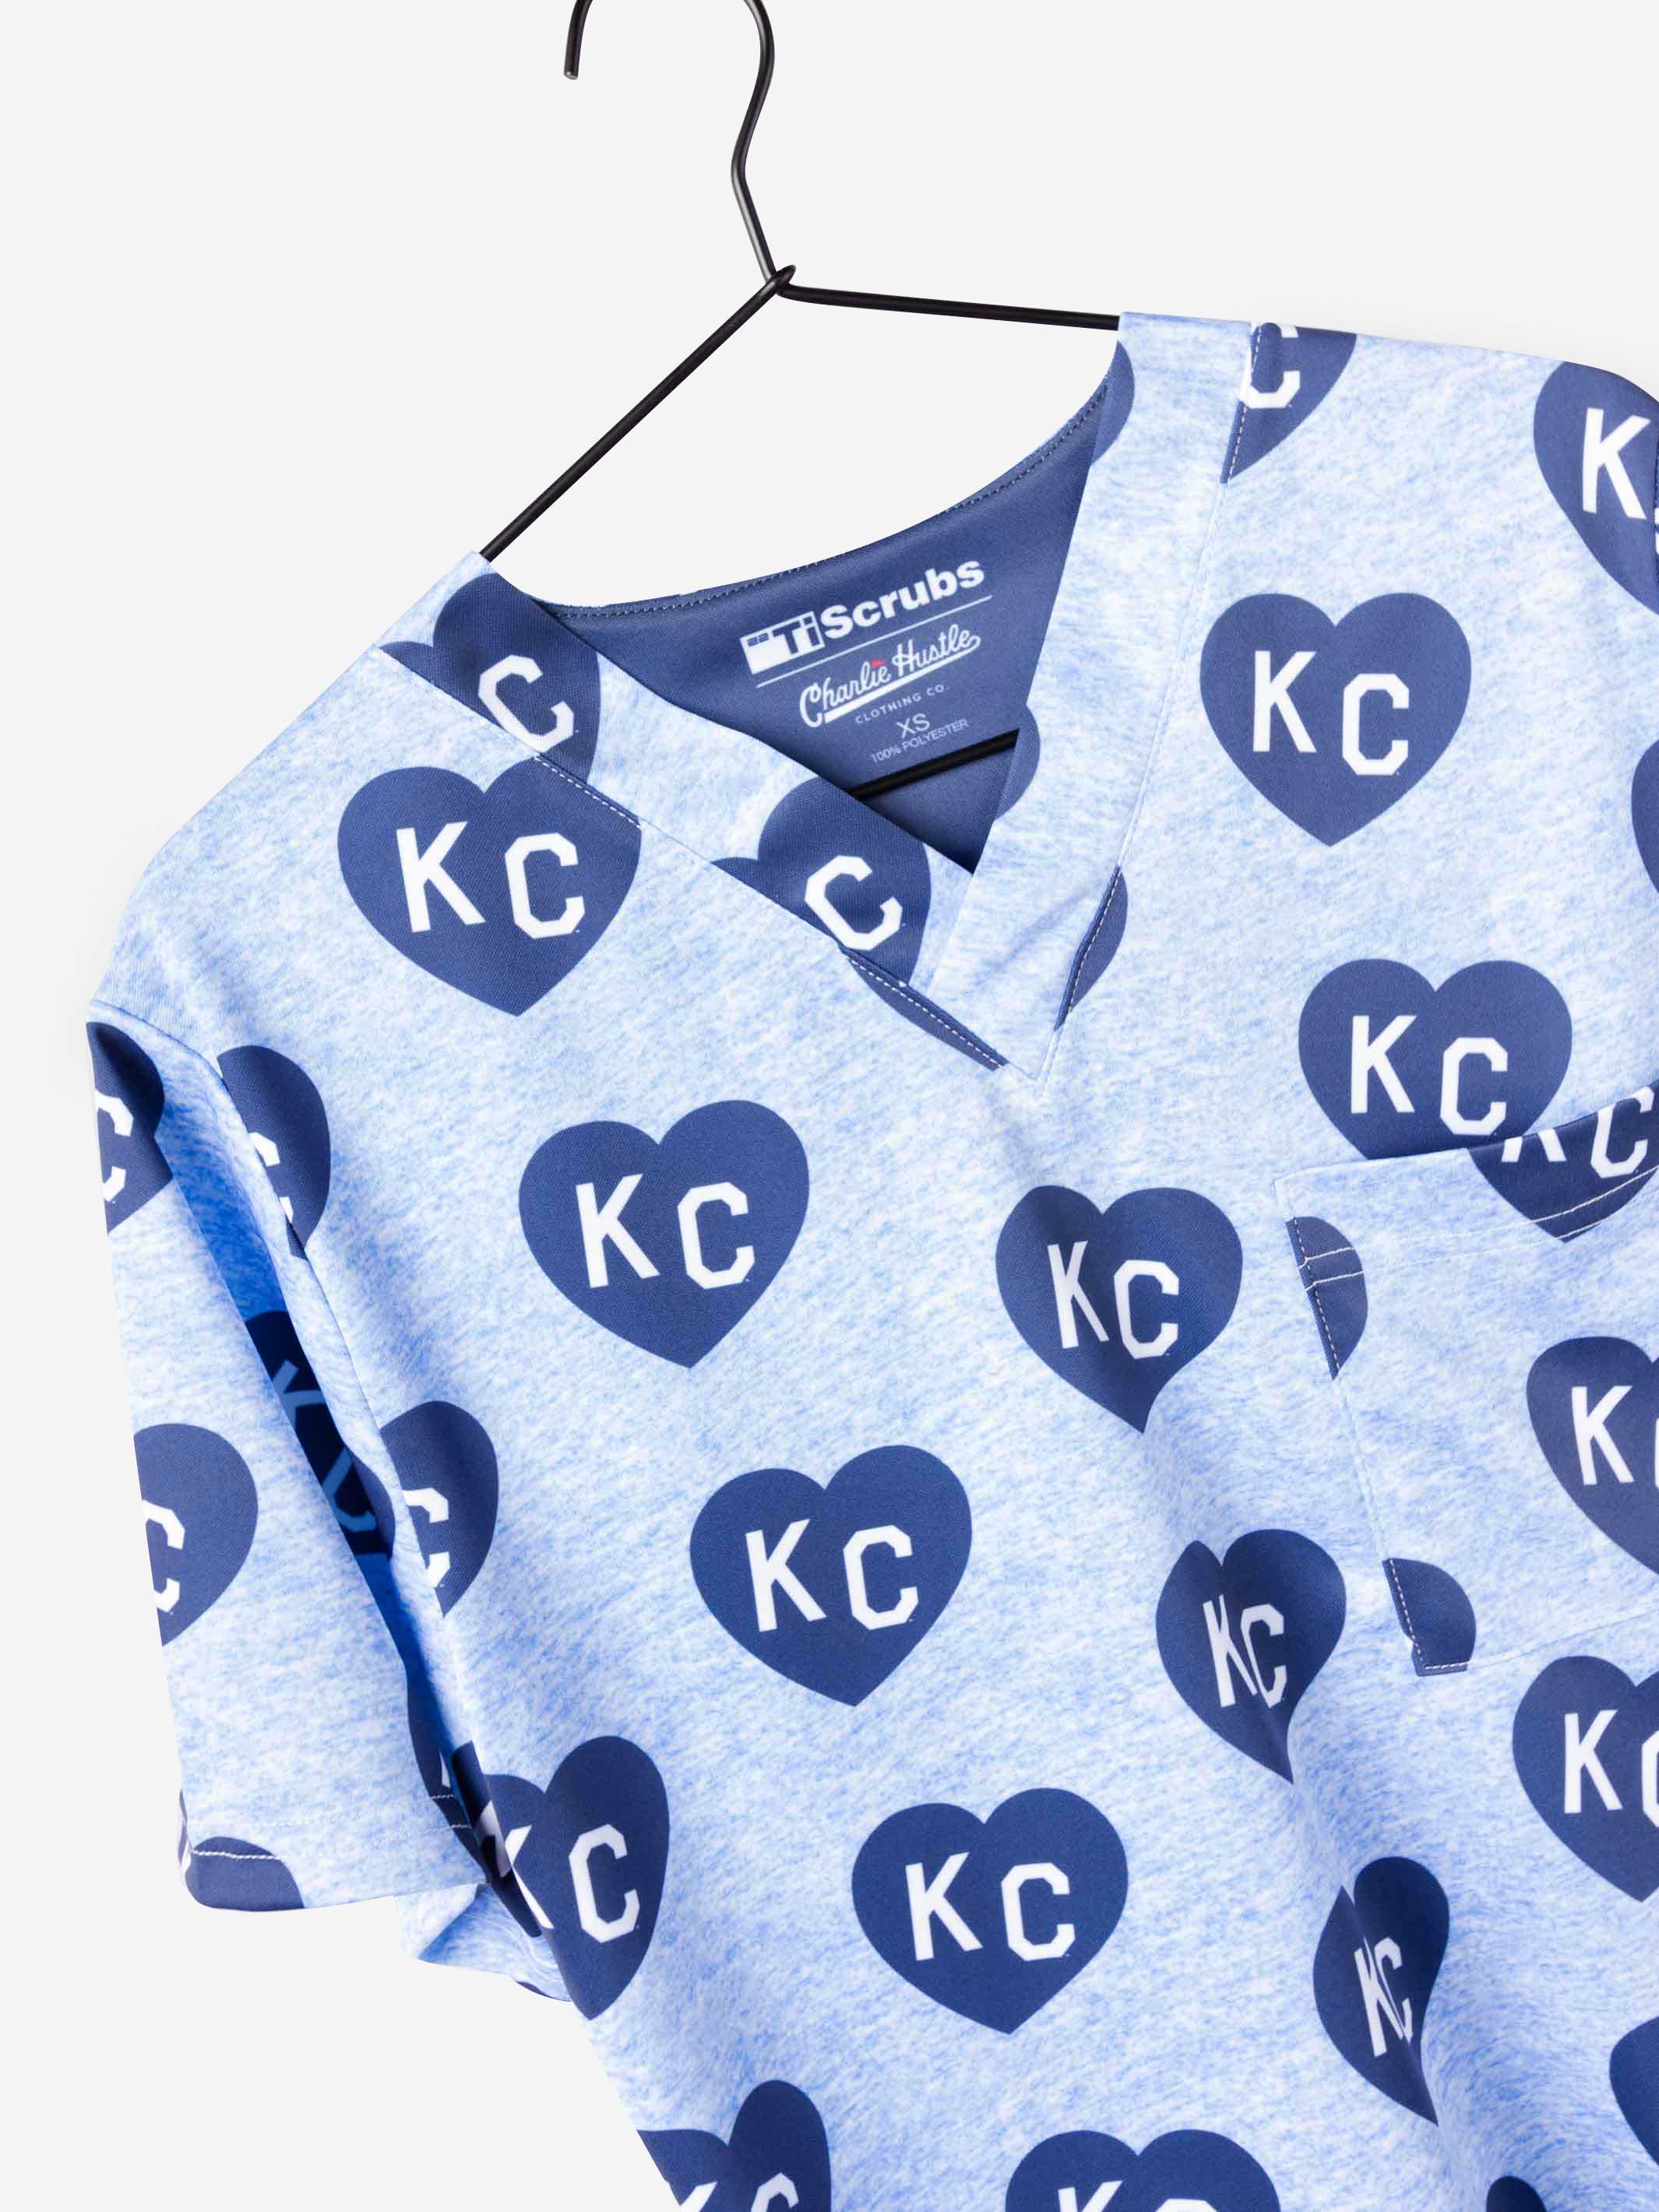 Men's Charlie Hustle Print Scrub Top with KC Heart All Over Pattern in Navy and Ceil Blue and heather gray